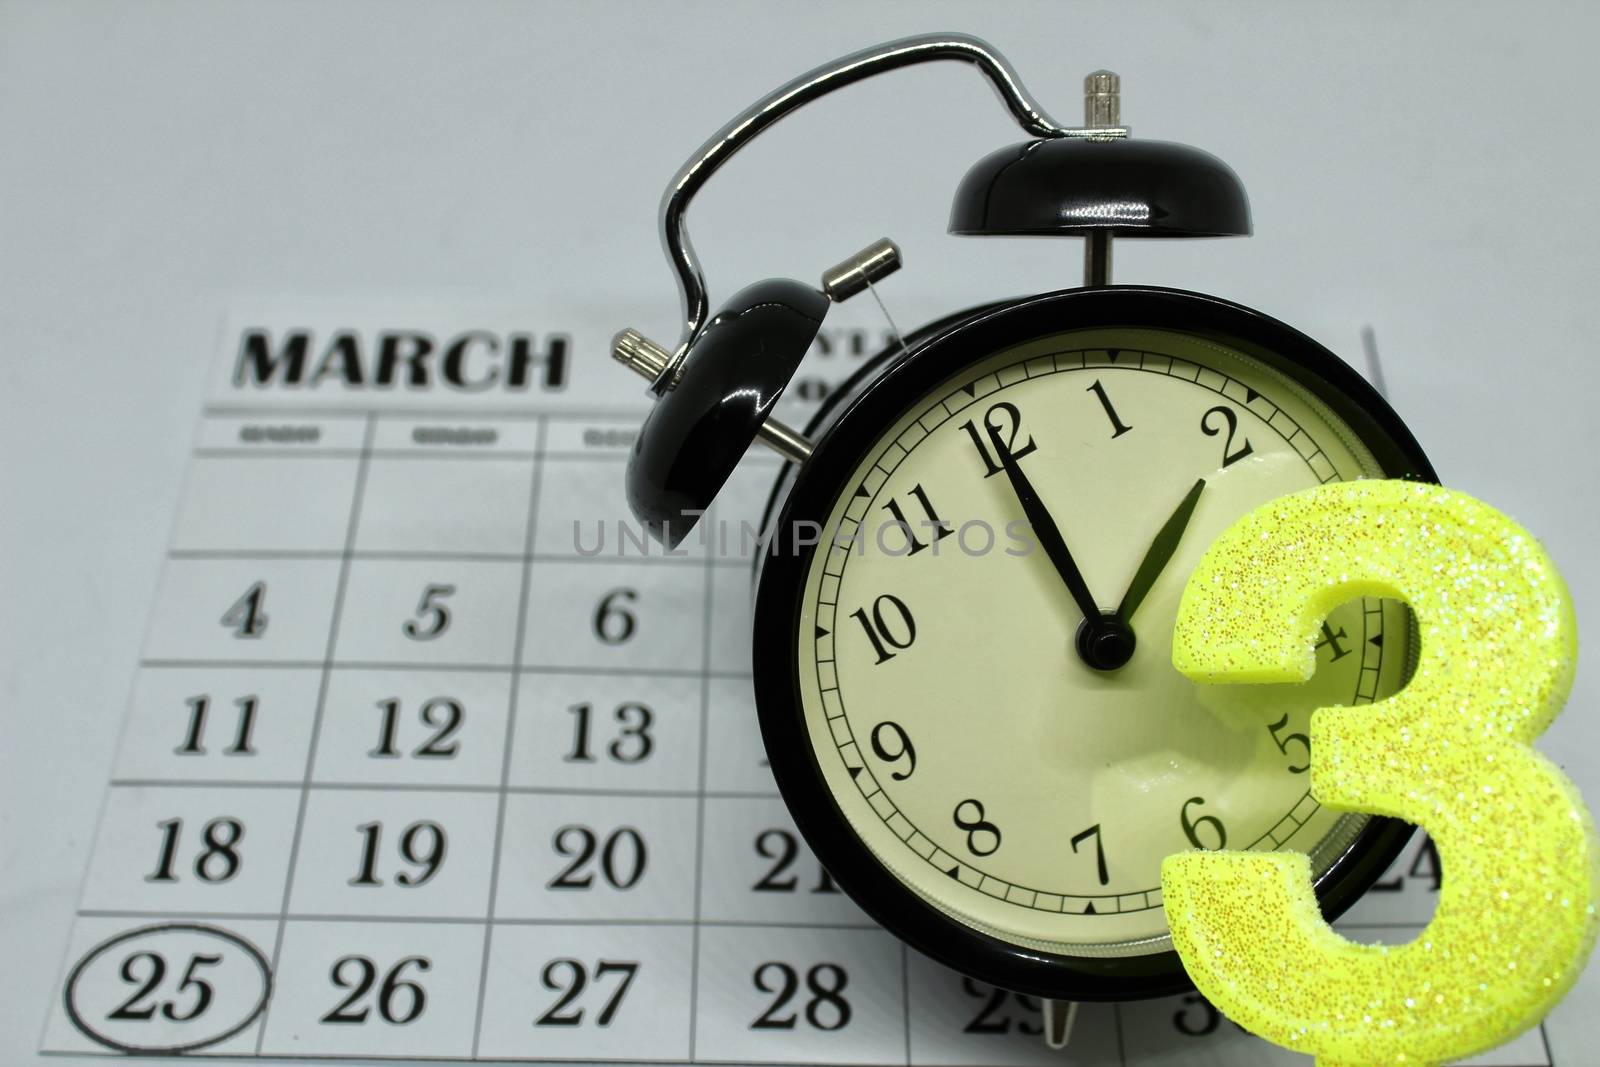 Daylight Savings Spring Forward sunday at 2:00 a.m. March 25 date indicated in the calendar.